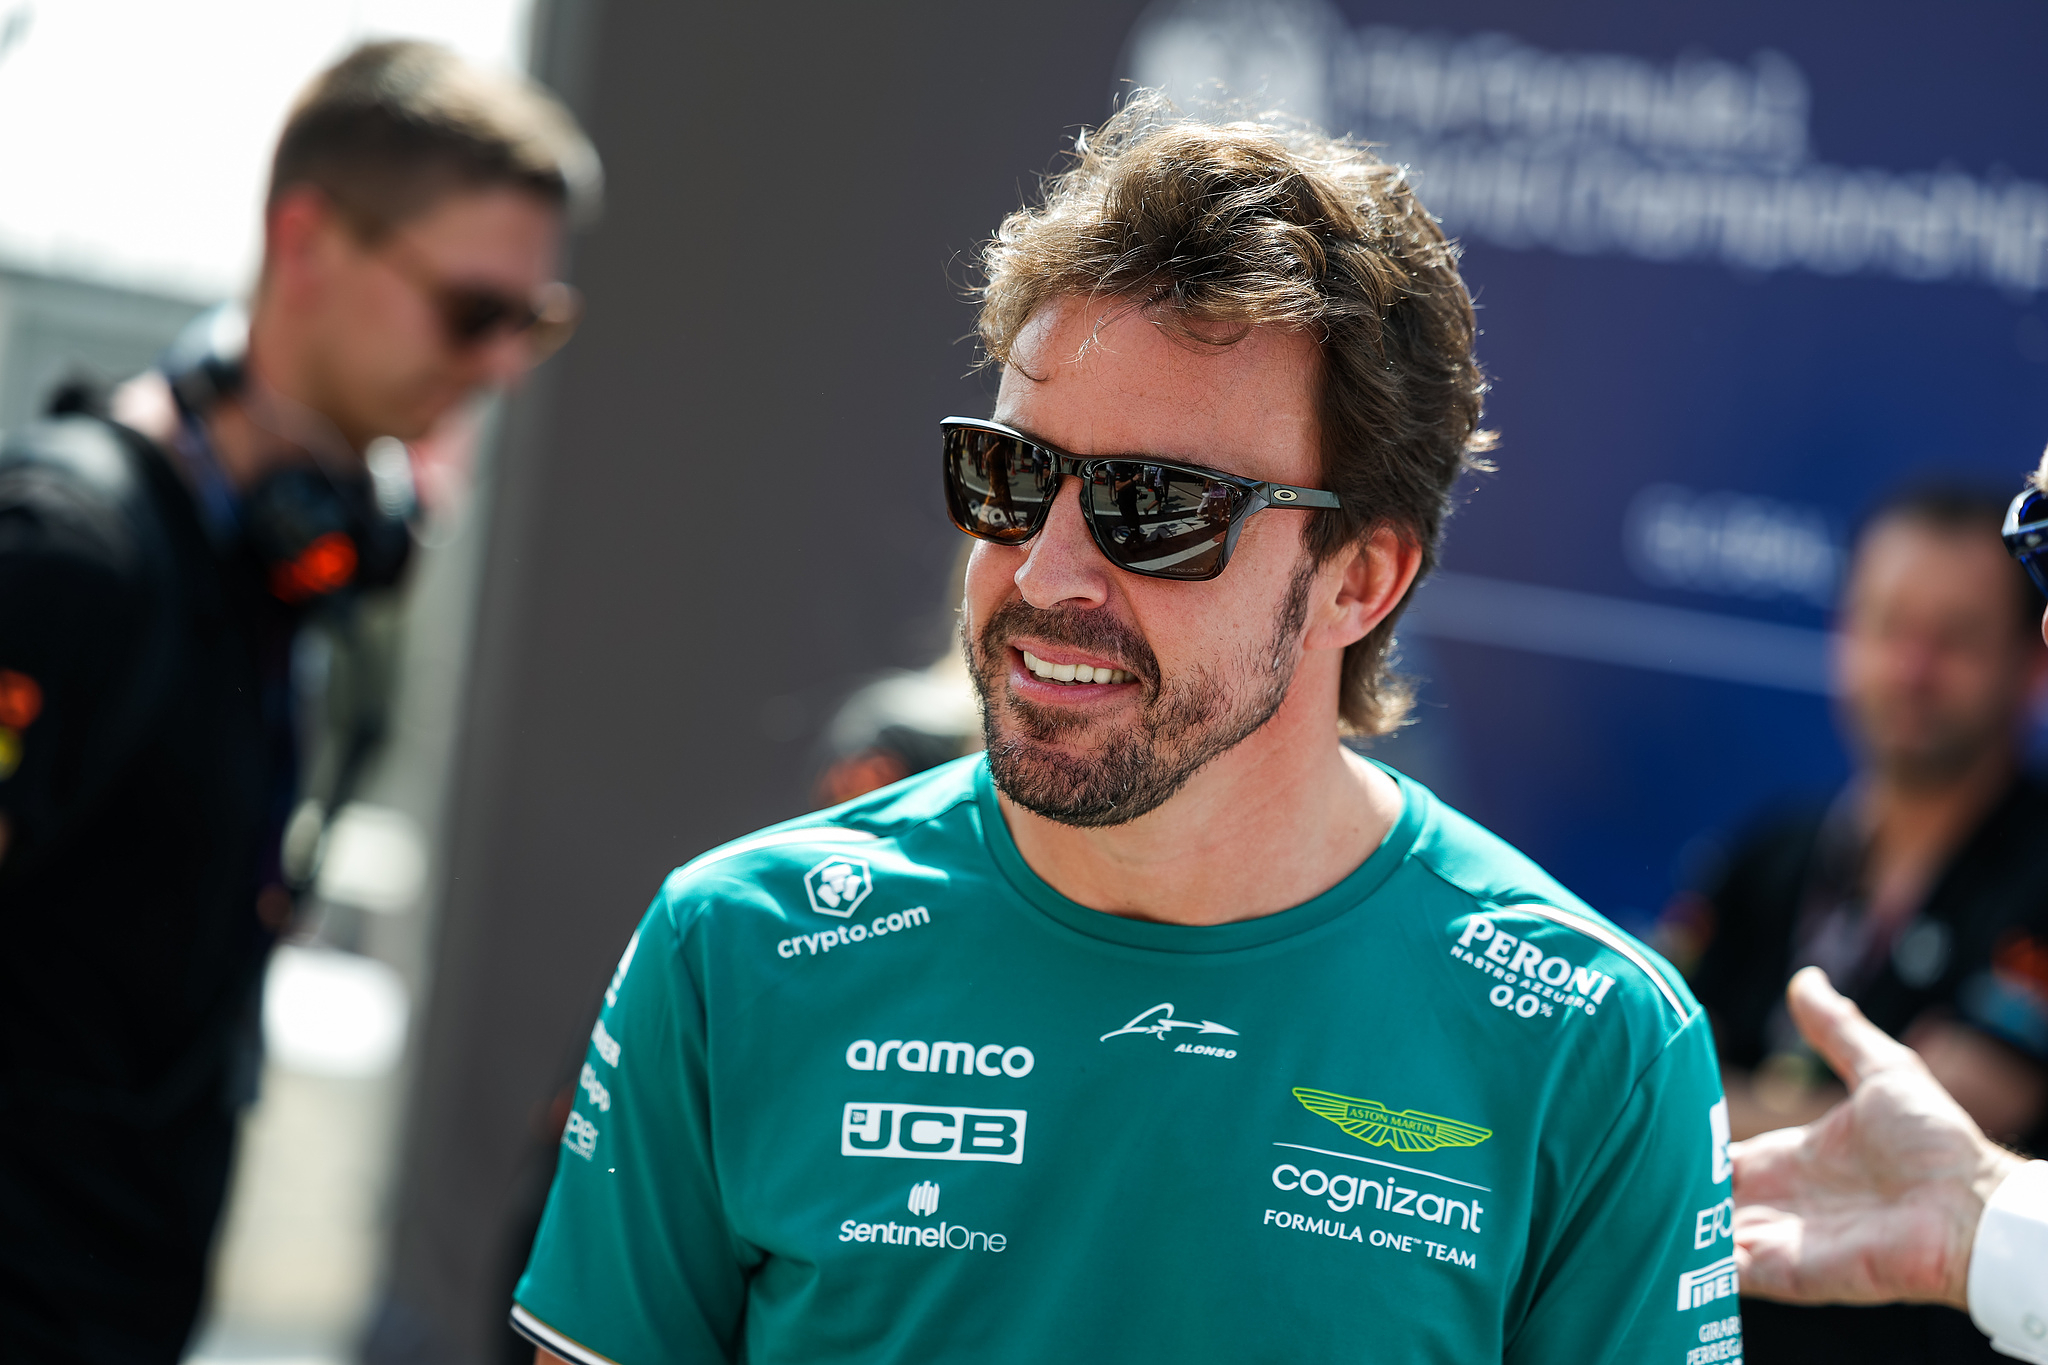 Fernando Alonso signs the longest contract of his career for two fundamental reasons